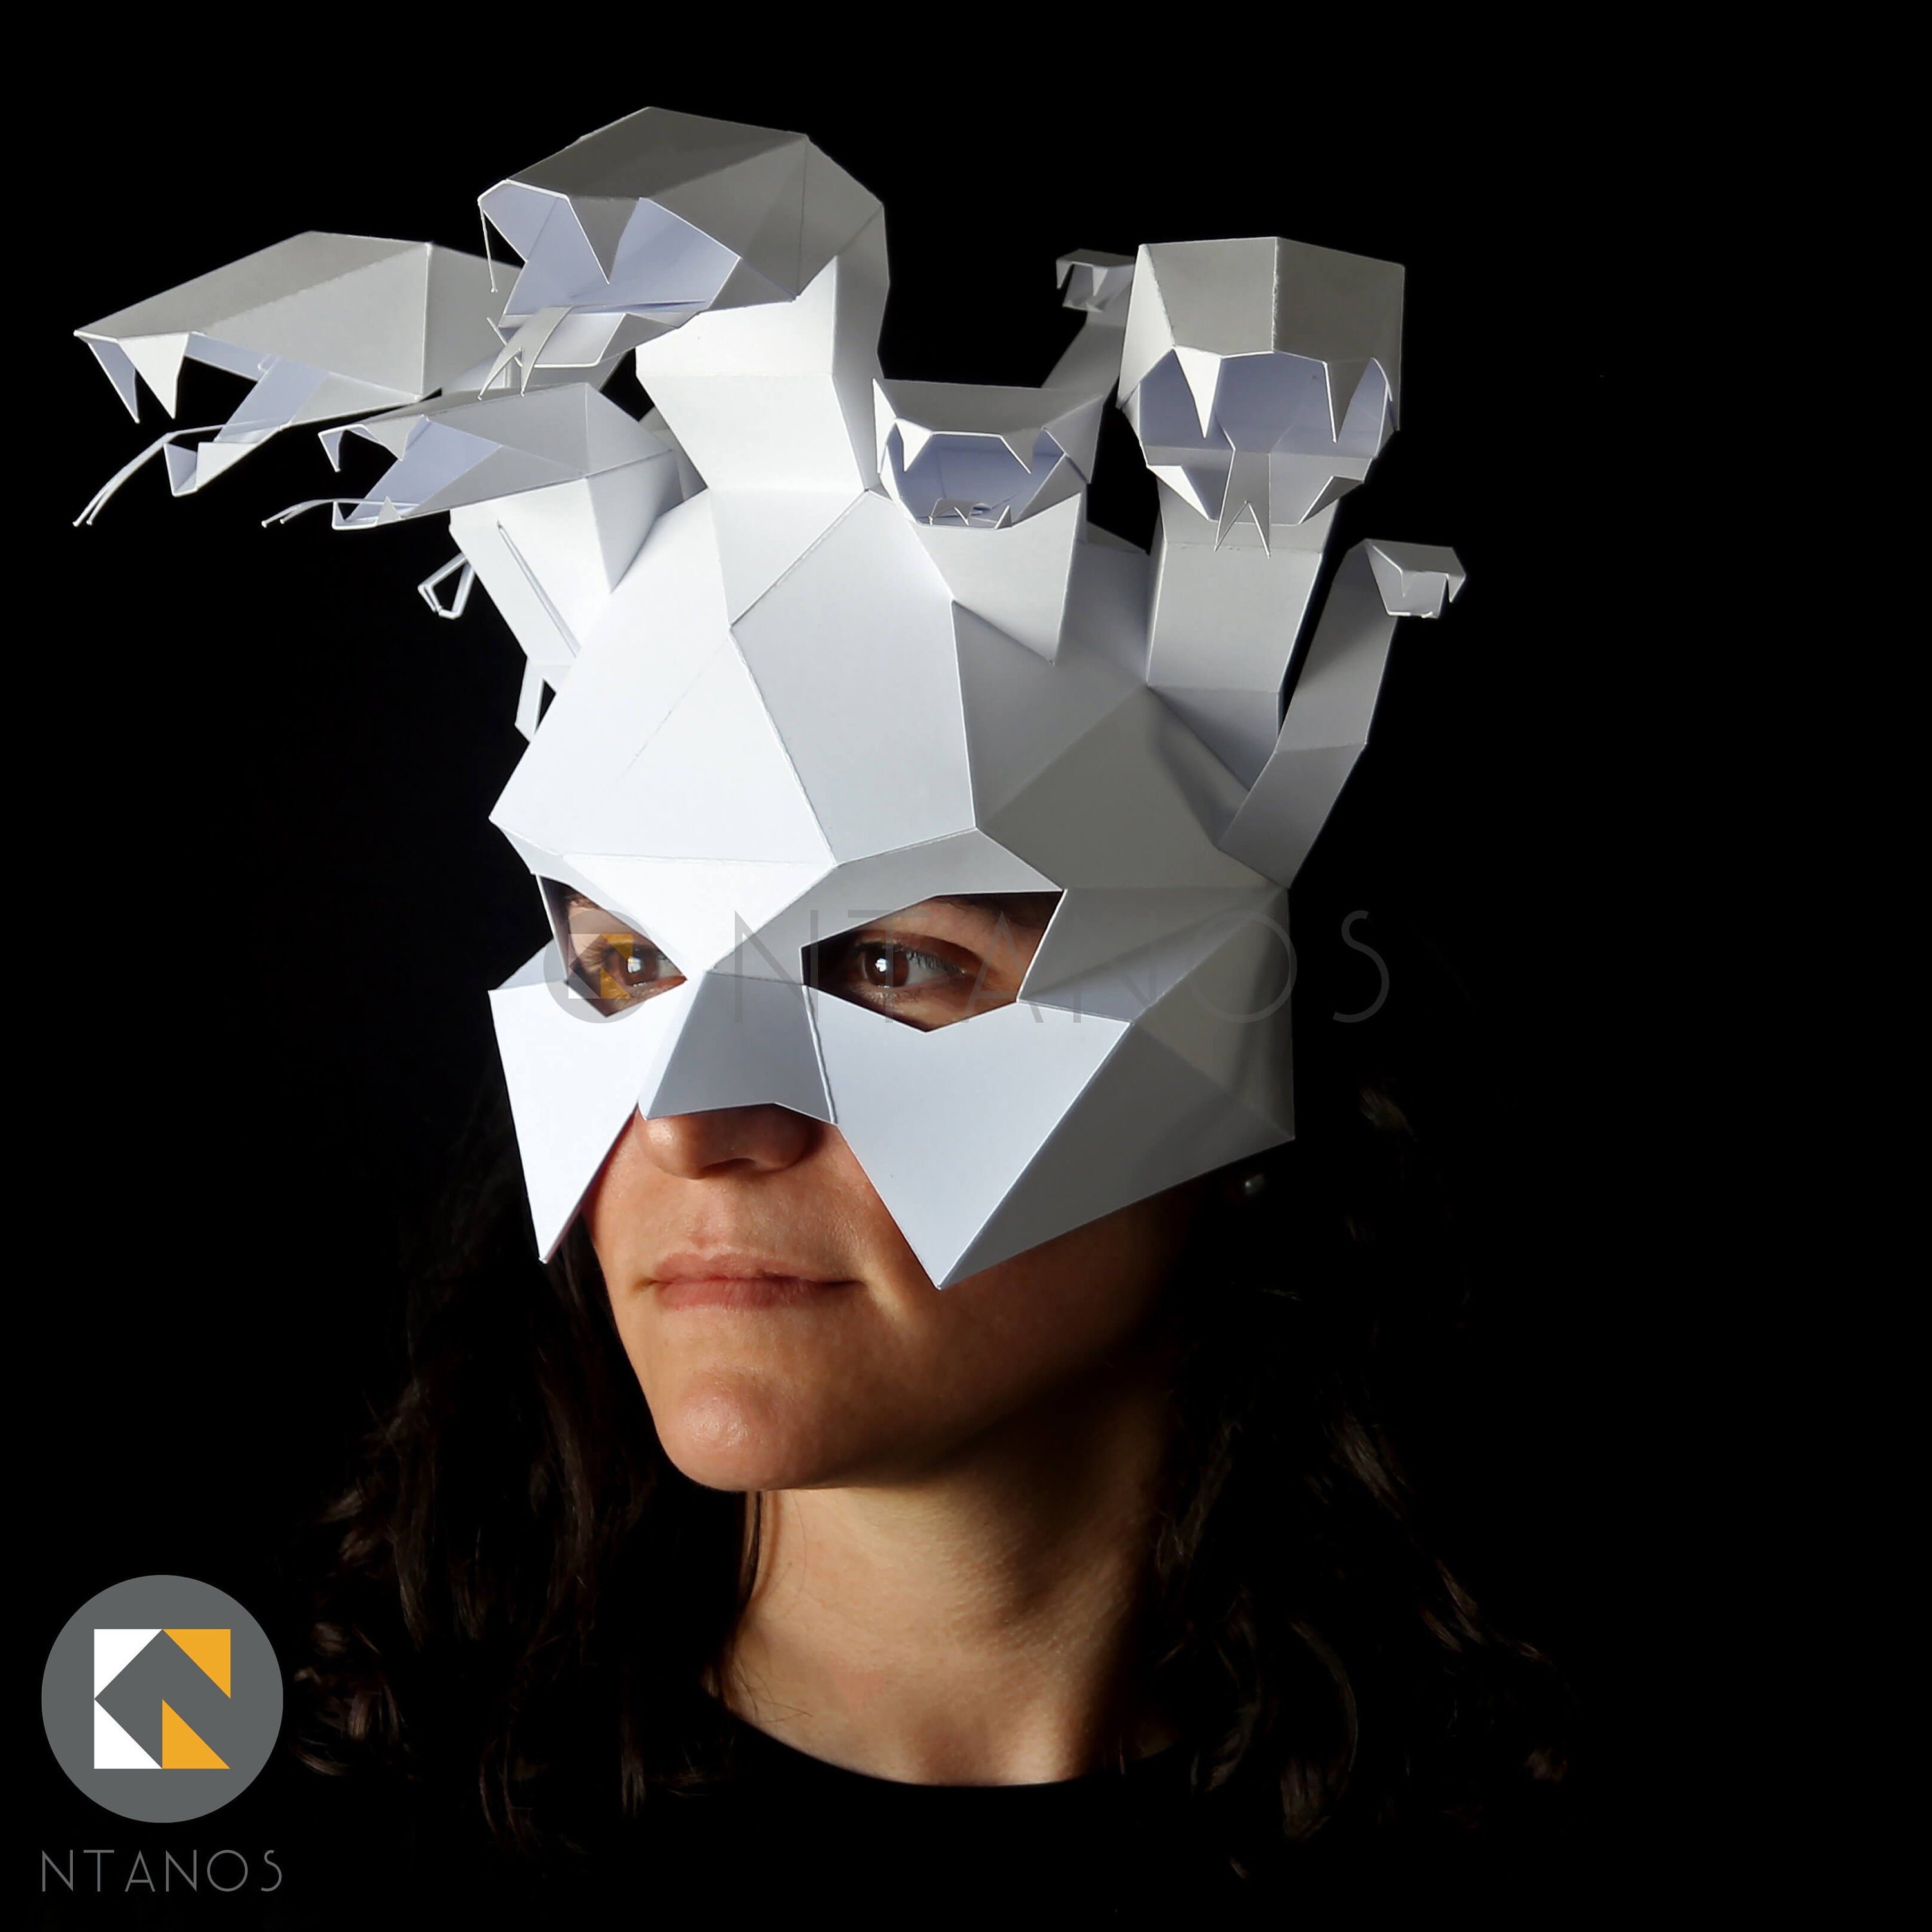 Medusa Mask Make Your Own Medusa With This Low Poly Paper Etsy